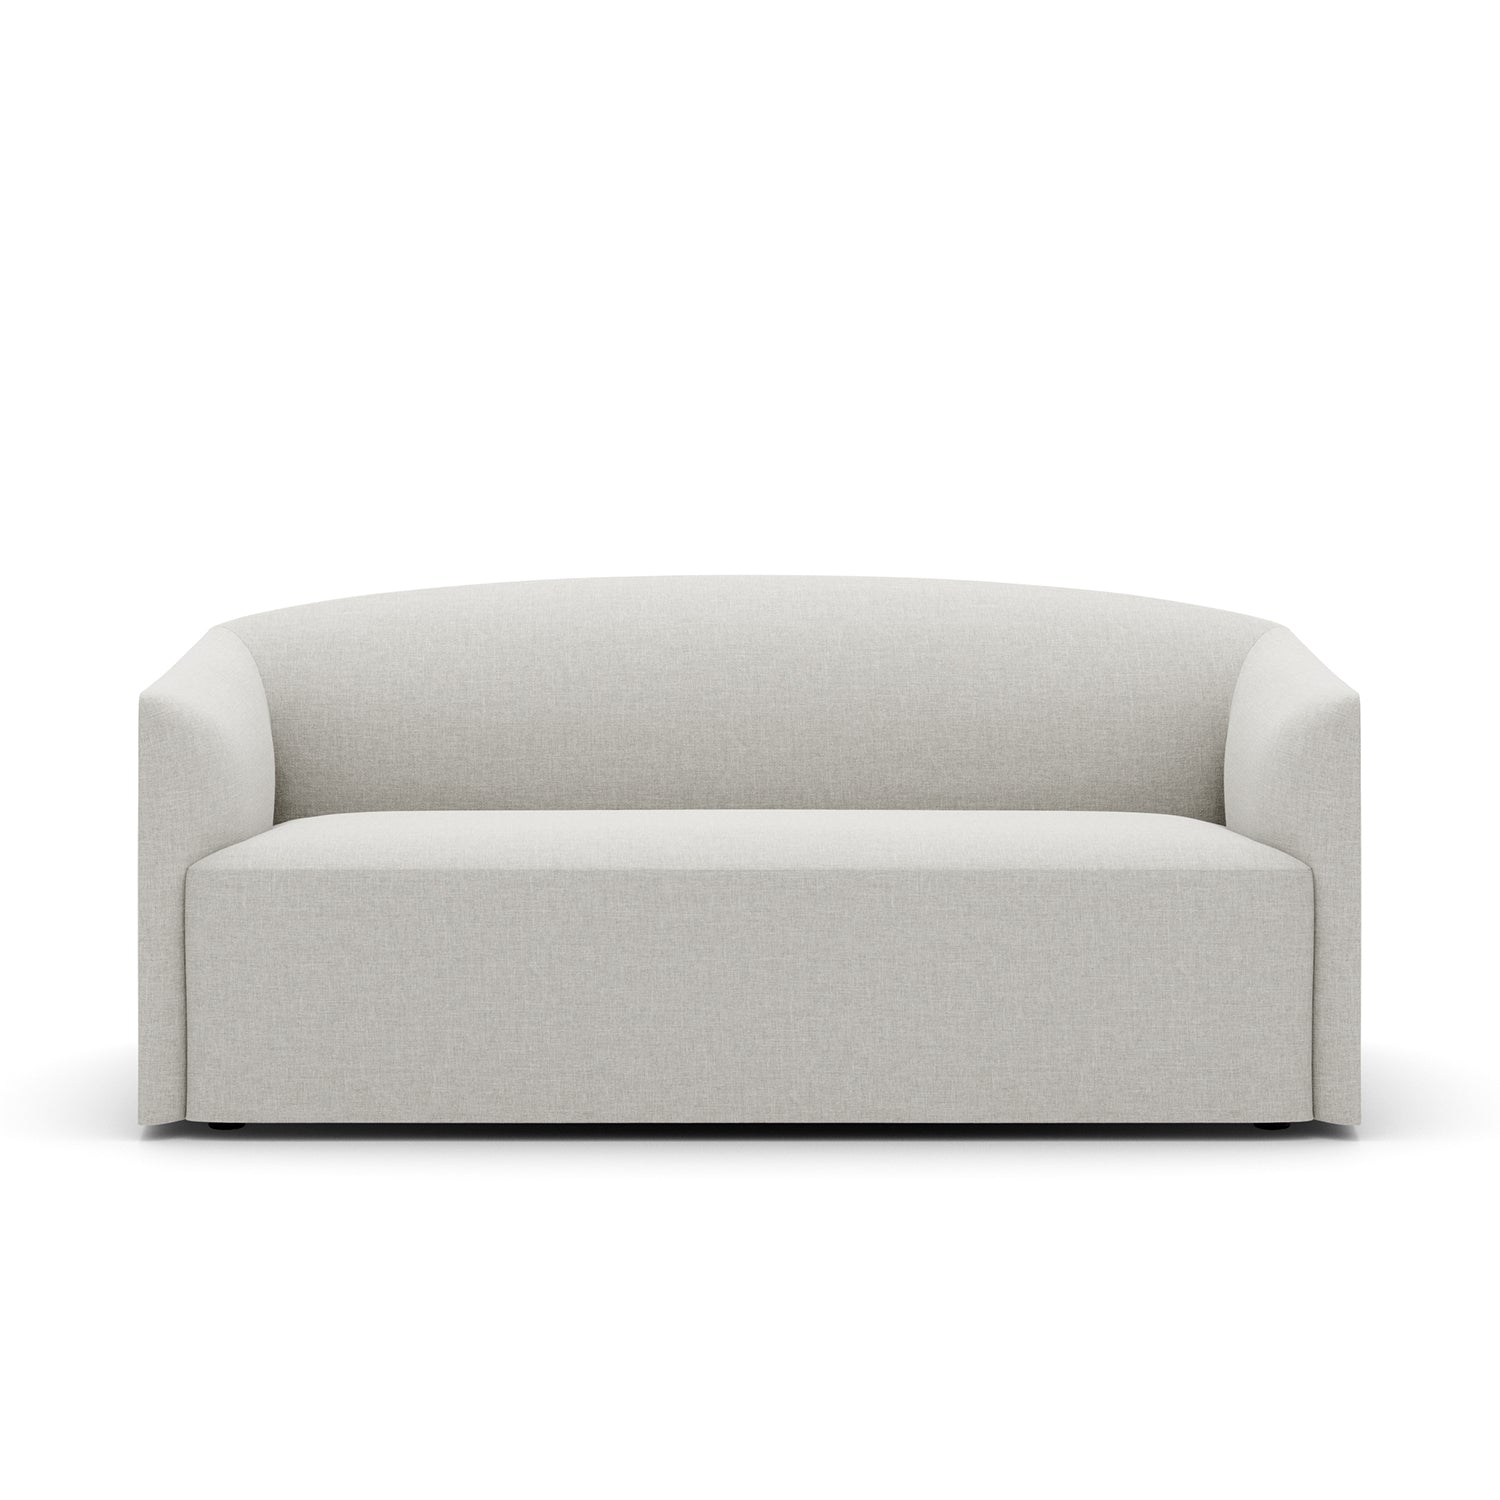 New Works Shore 2 Seater Sofa in quill